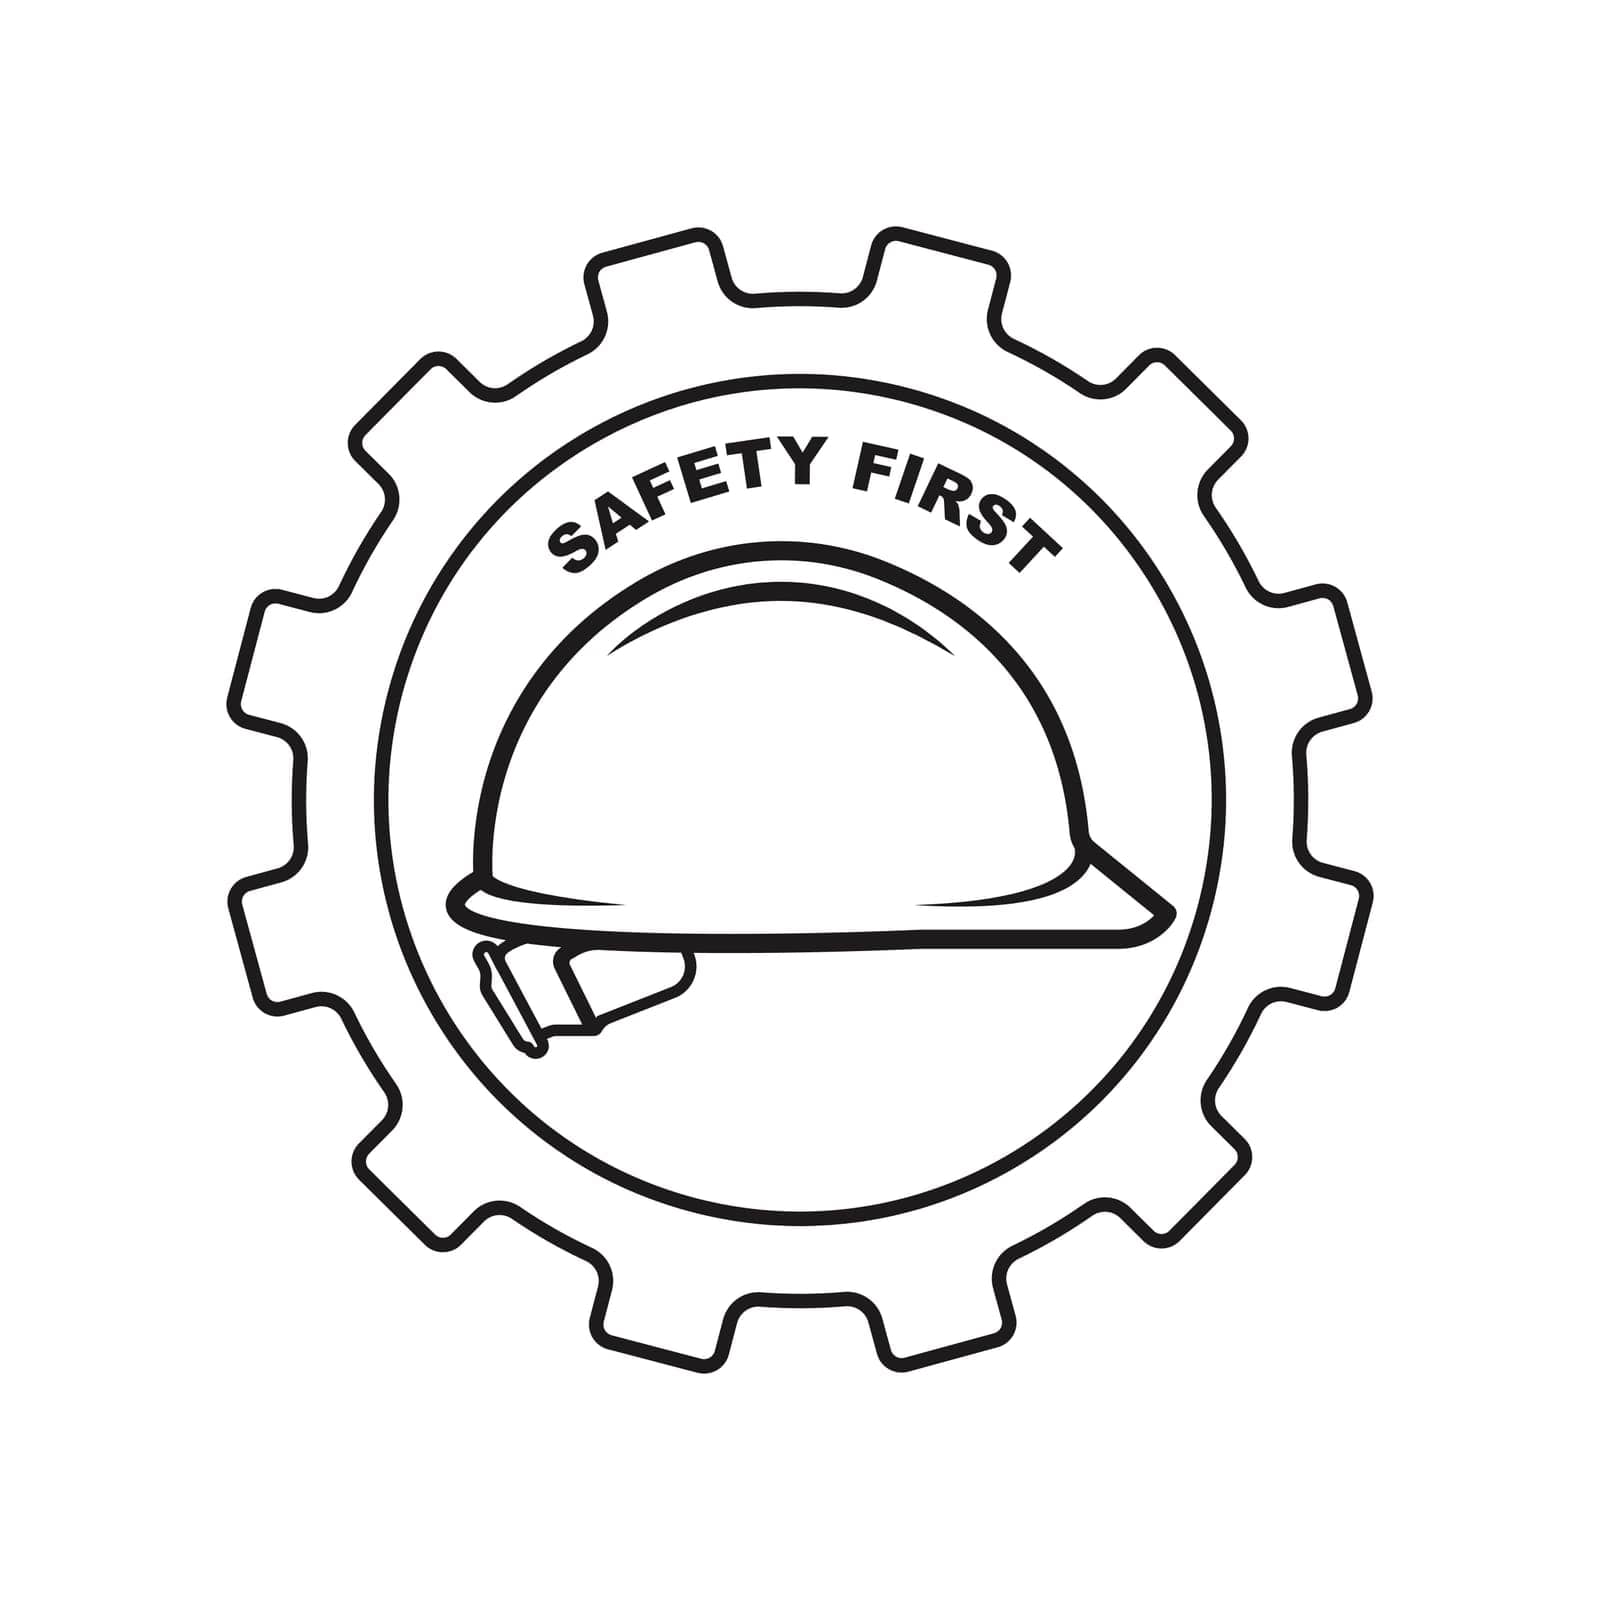 Safety first logo by rnking